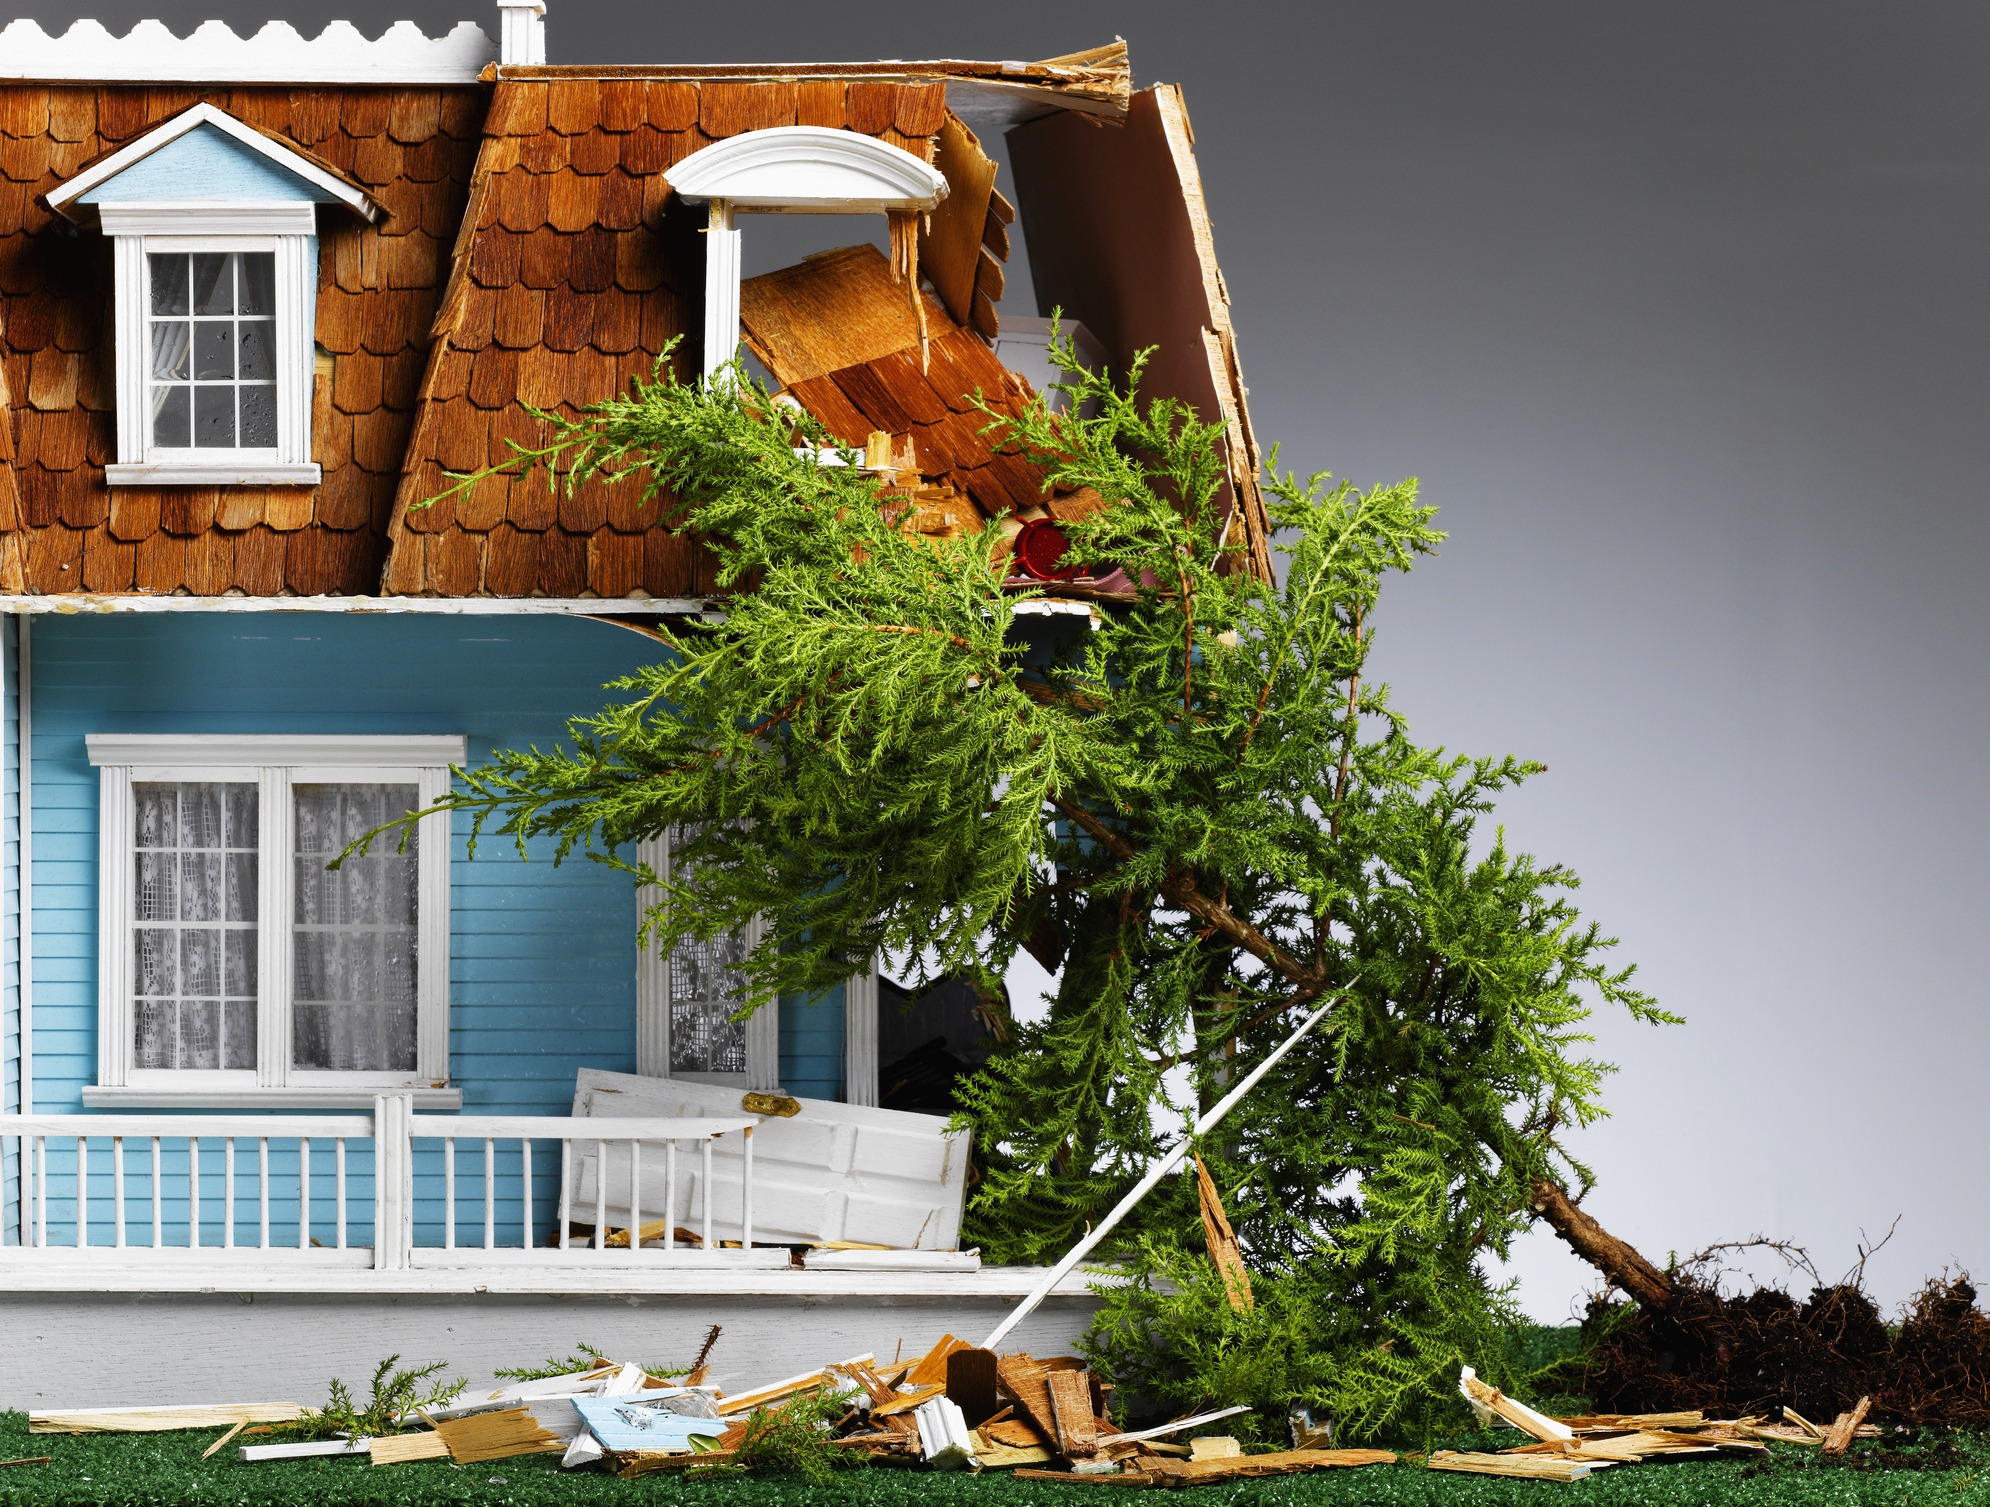 Miniature of house and tree affected by hurricane